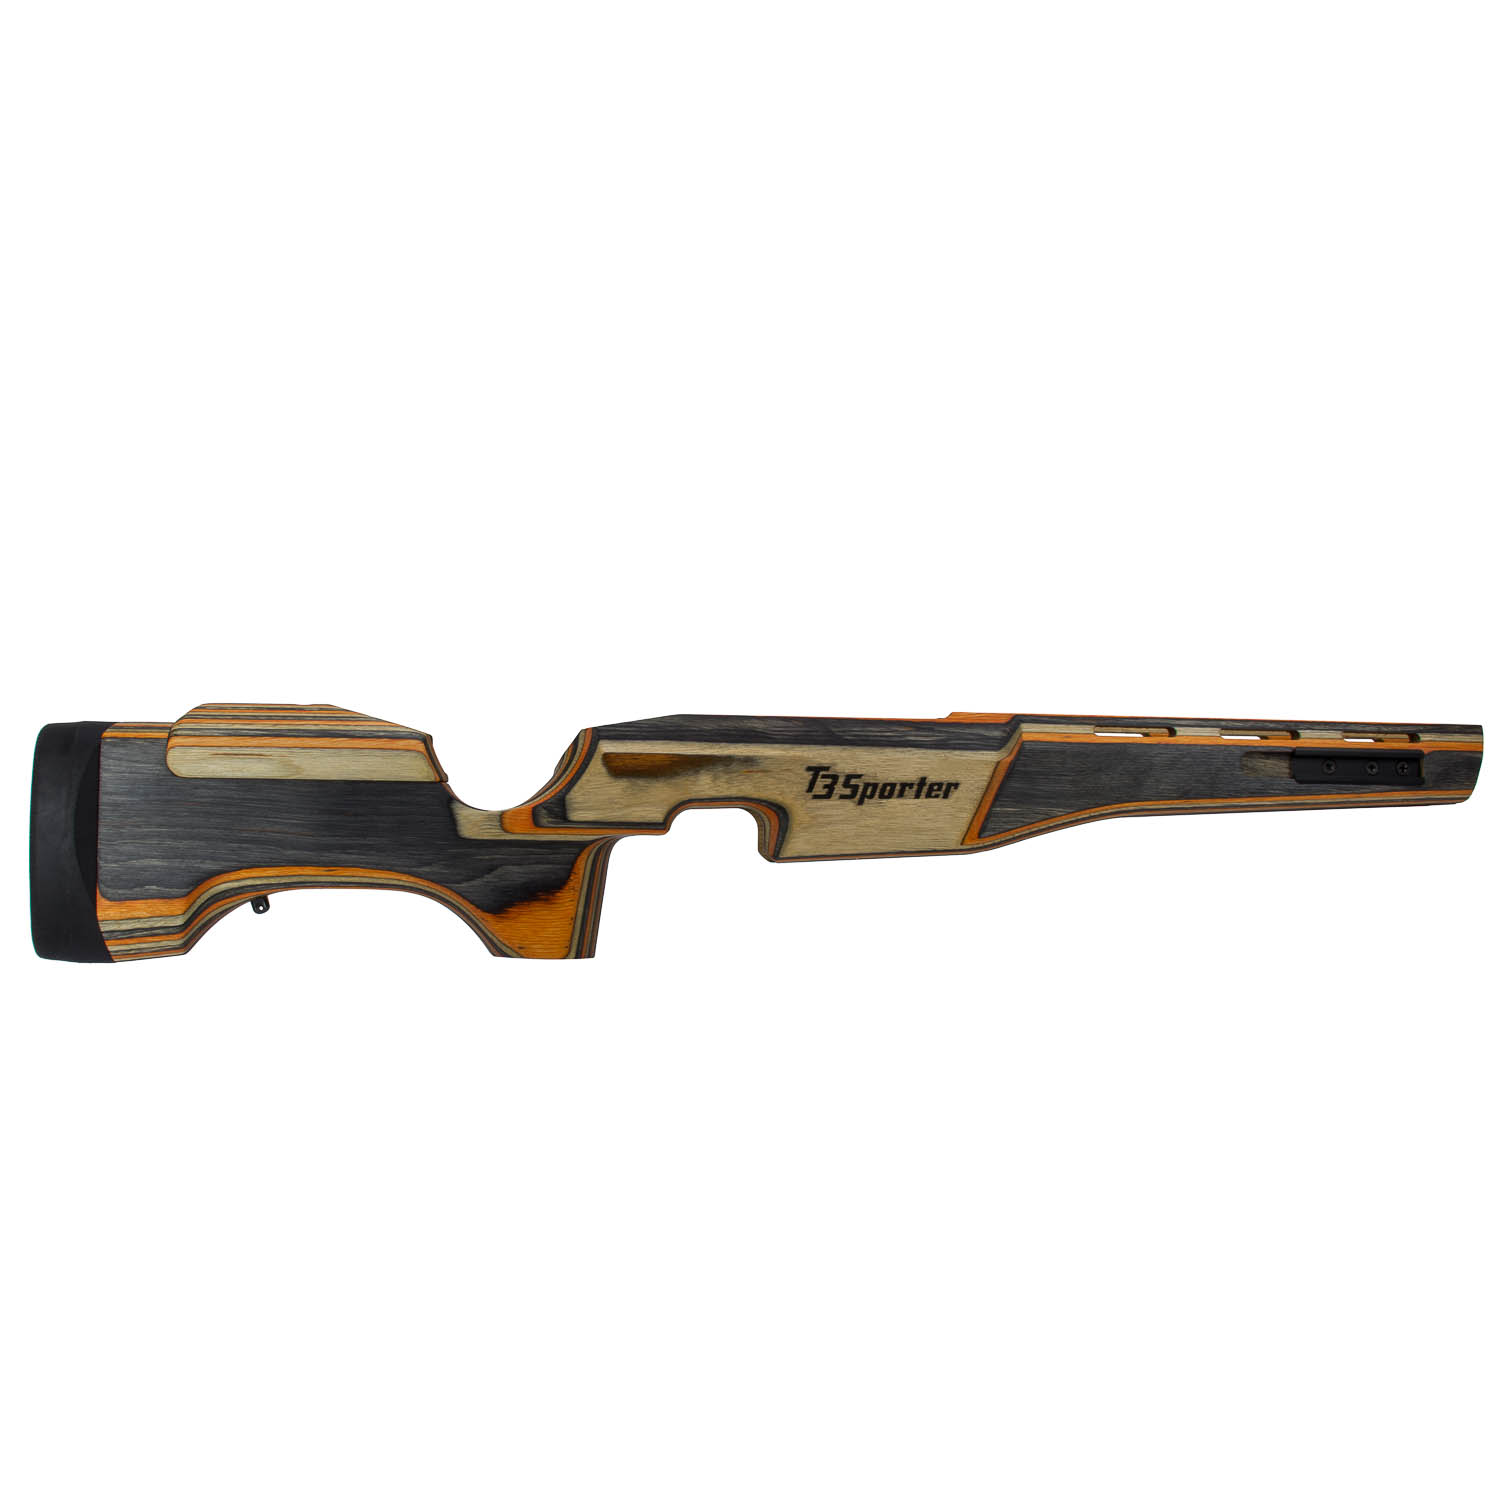 Tikka T3 Wooden Stock - Other Sales - Pigeon Watch Forums